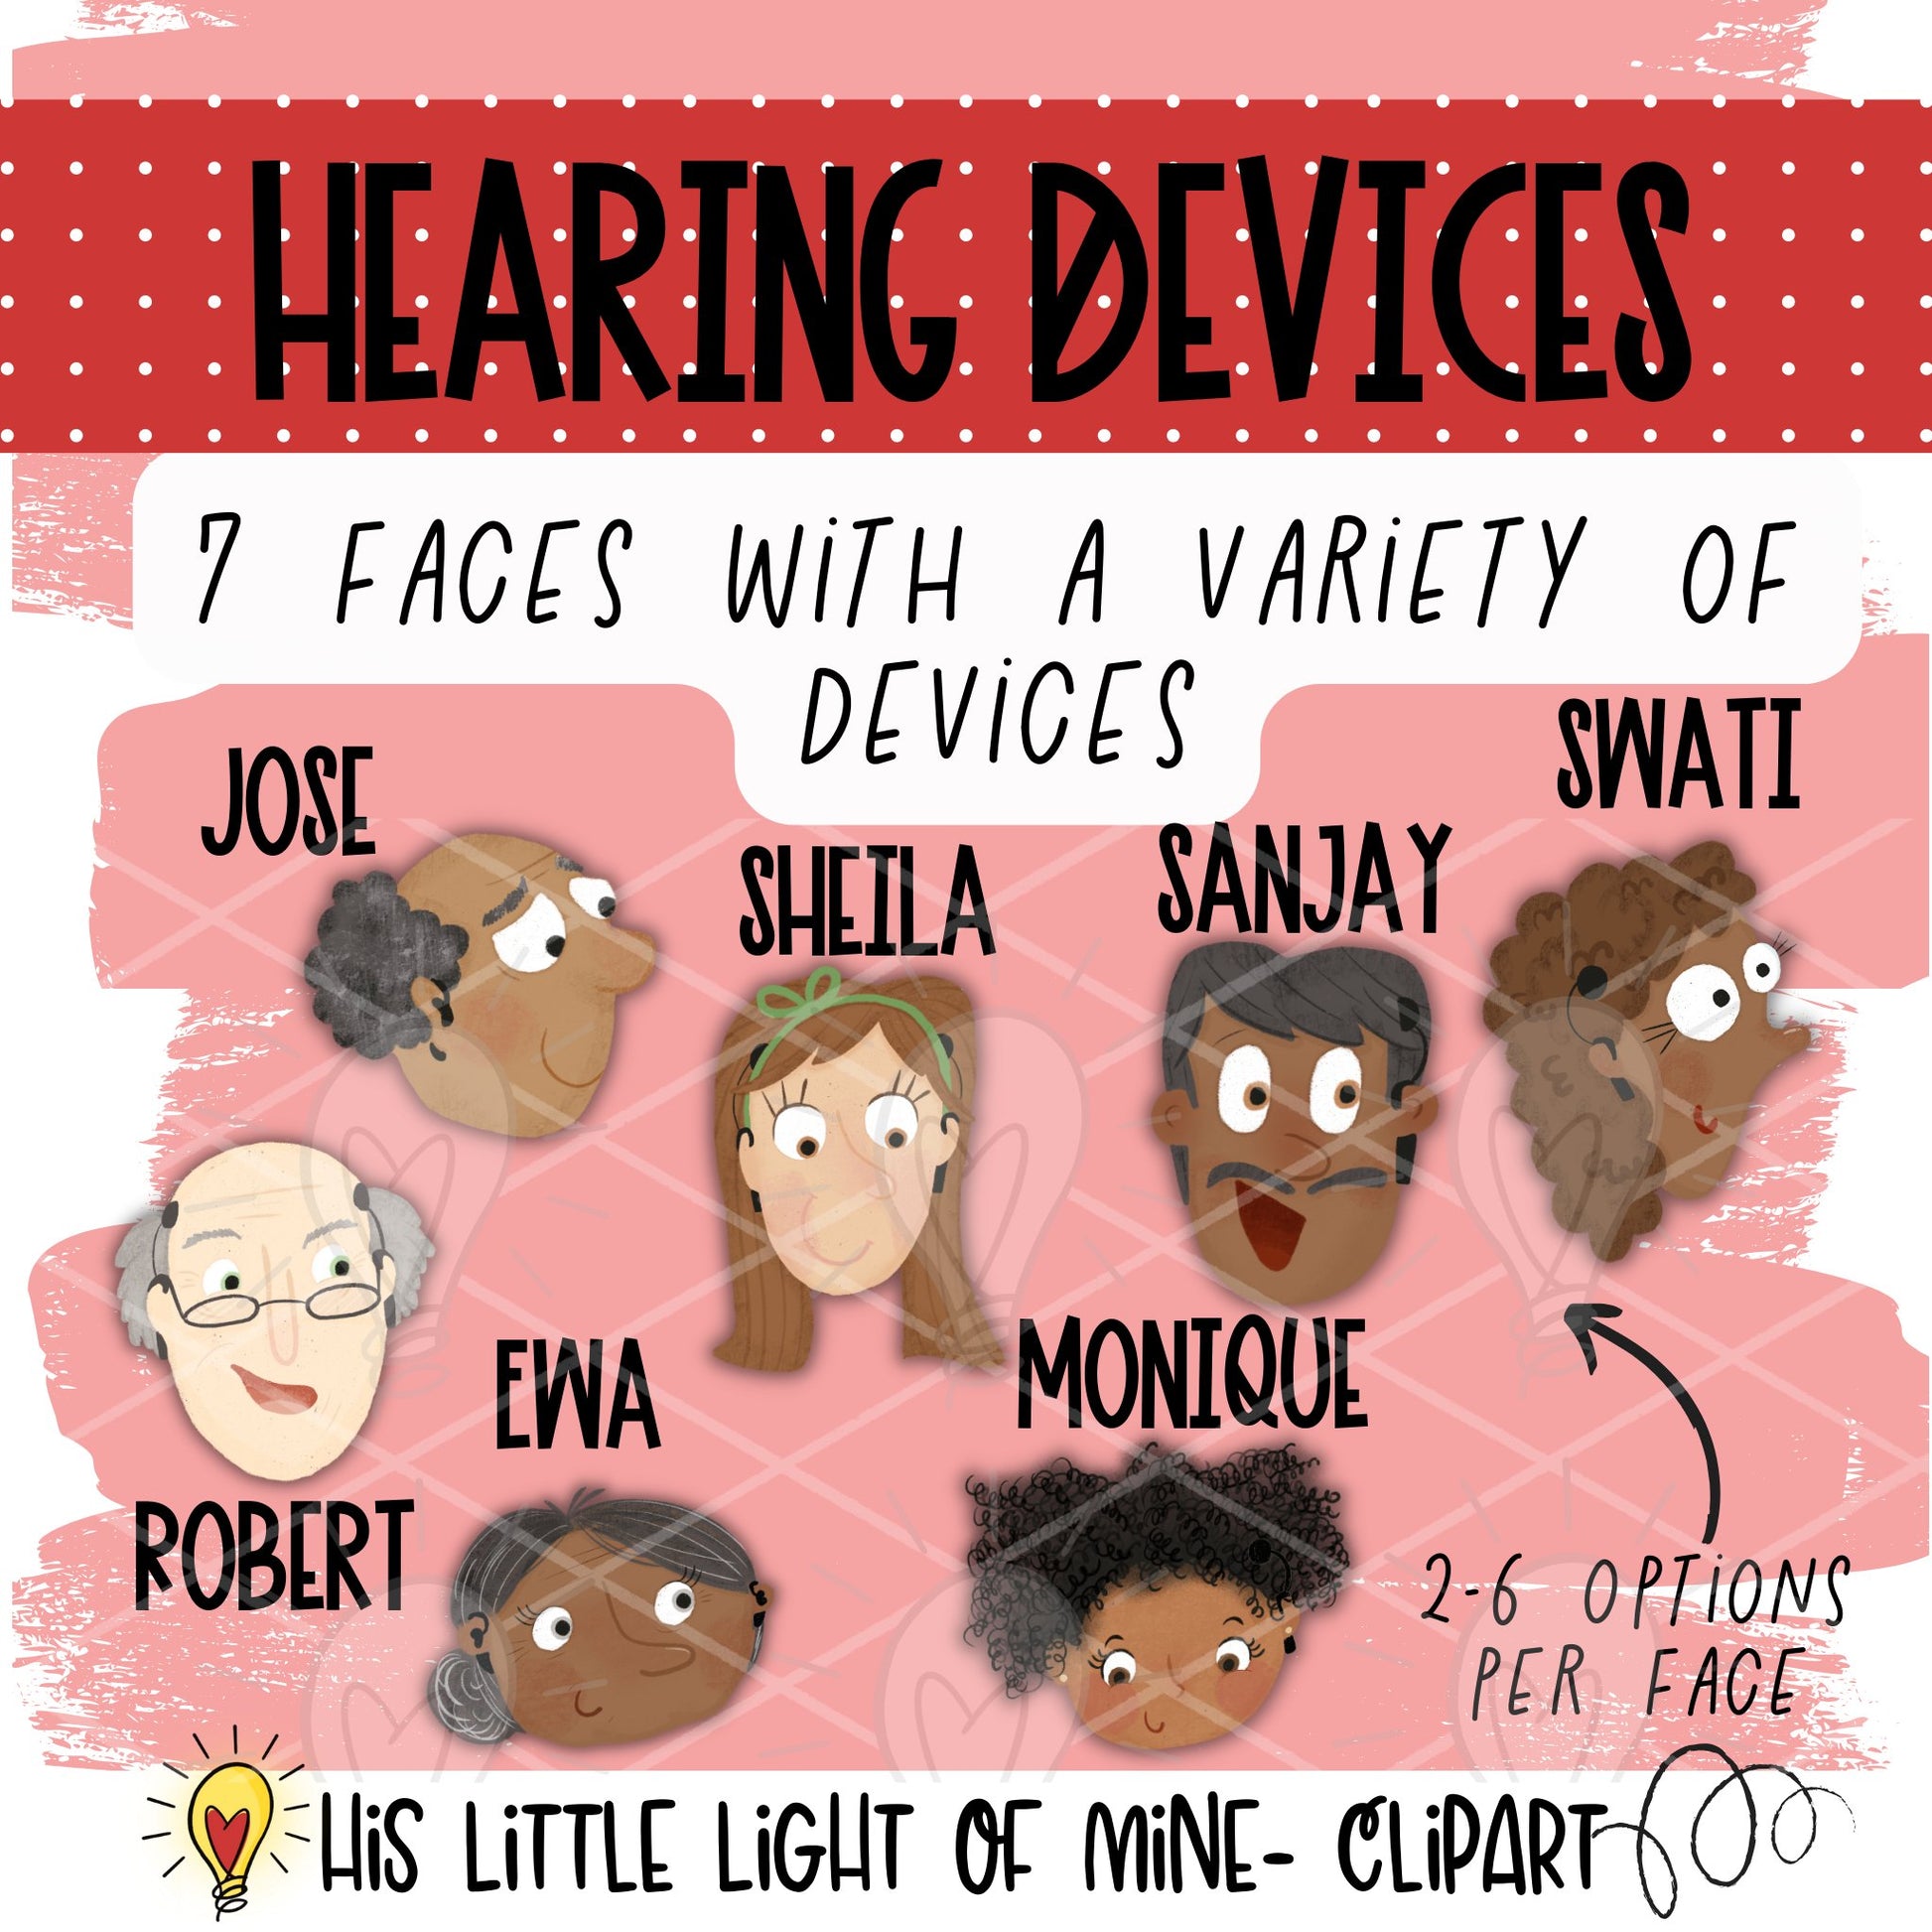 Clip art images of all seven, named adults both men and women wearing mixed devices including cochlear implants and hearing aids 